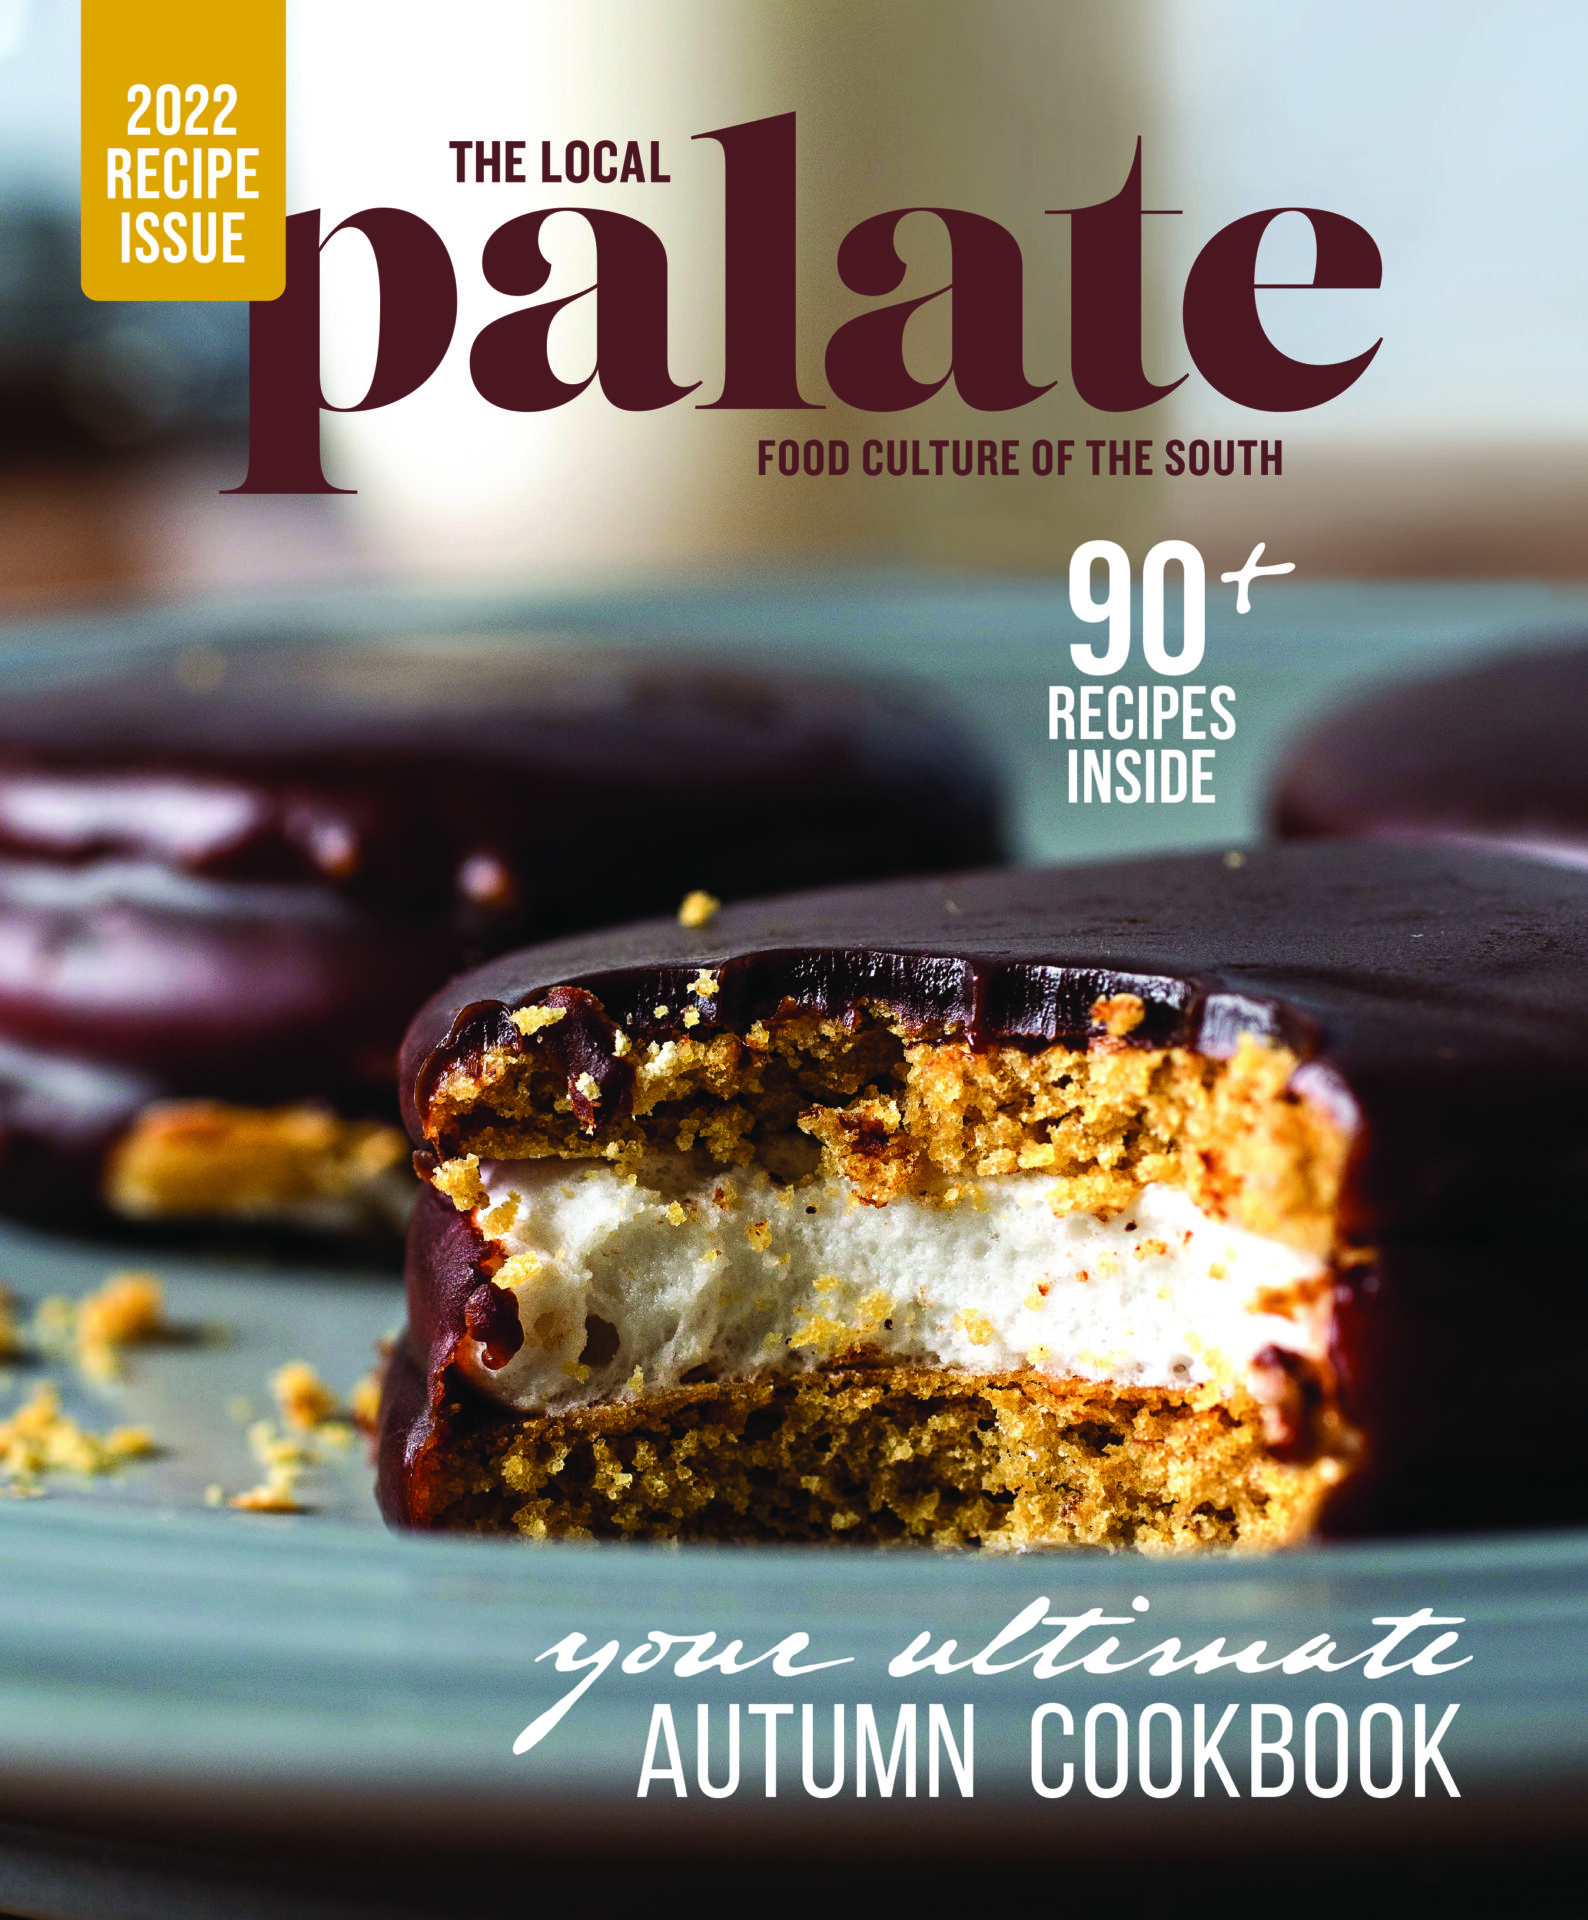 The Local Palate Fall/Winter 2022 Cover with a Moonpie and 90 recipes for your ultimate autumn cookbook